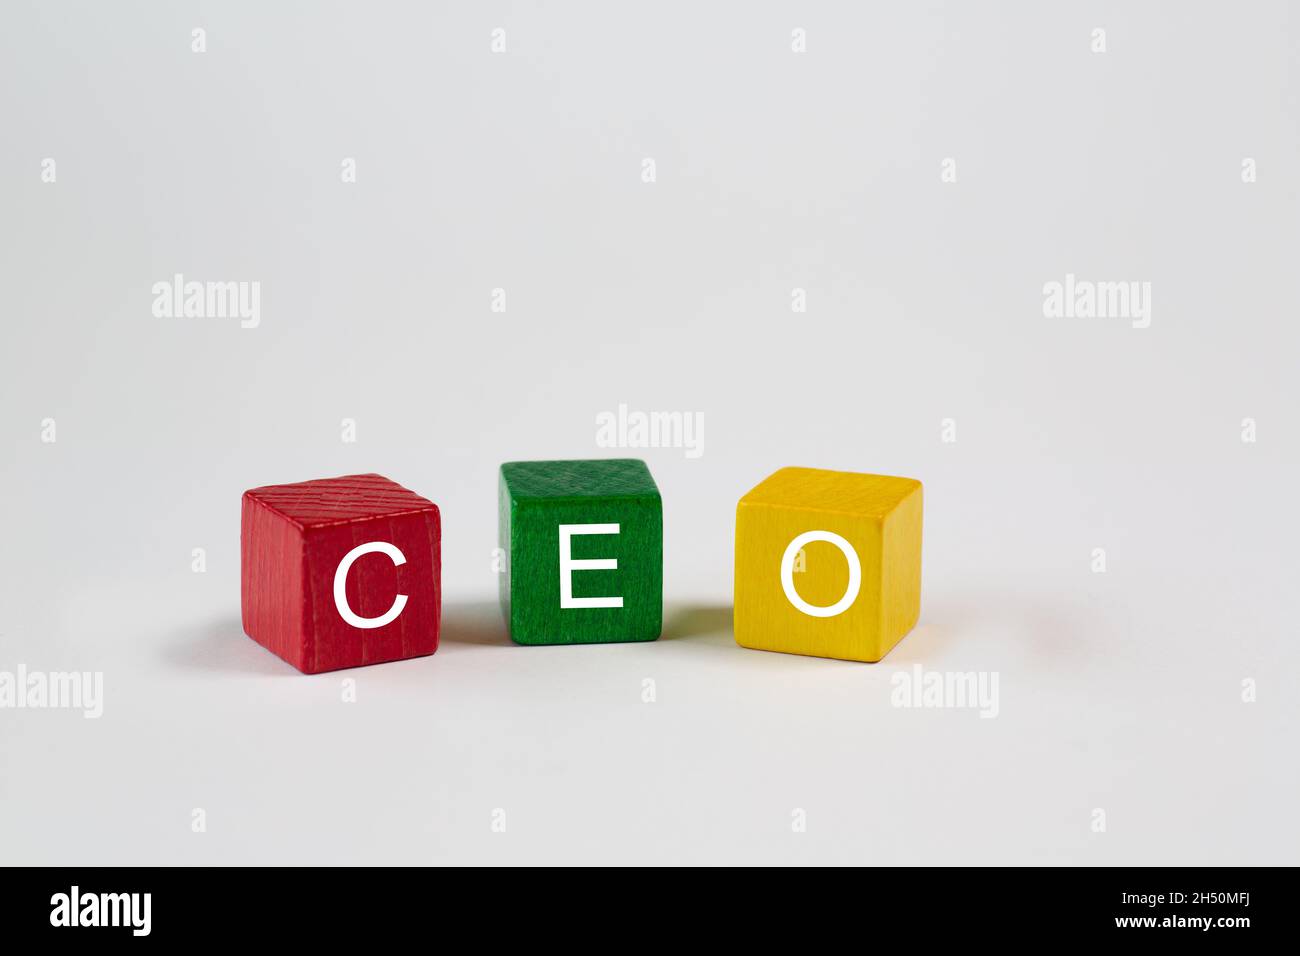 colored blocks against an isolated white background contain the letters CEO, which stand for Chief Executive Officer. Free space is available in this Stock Photo